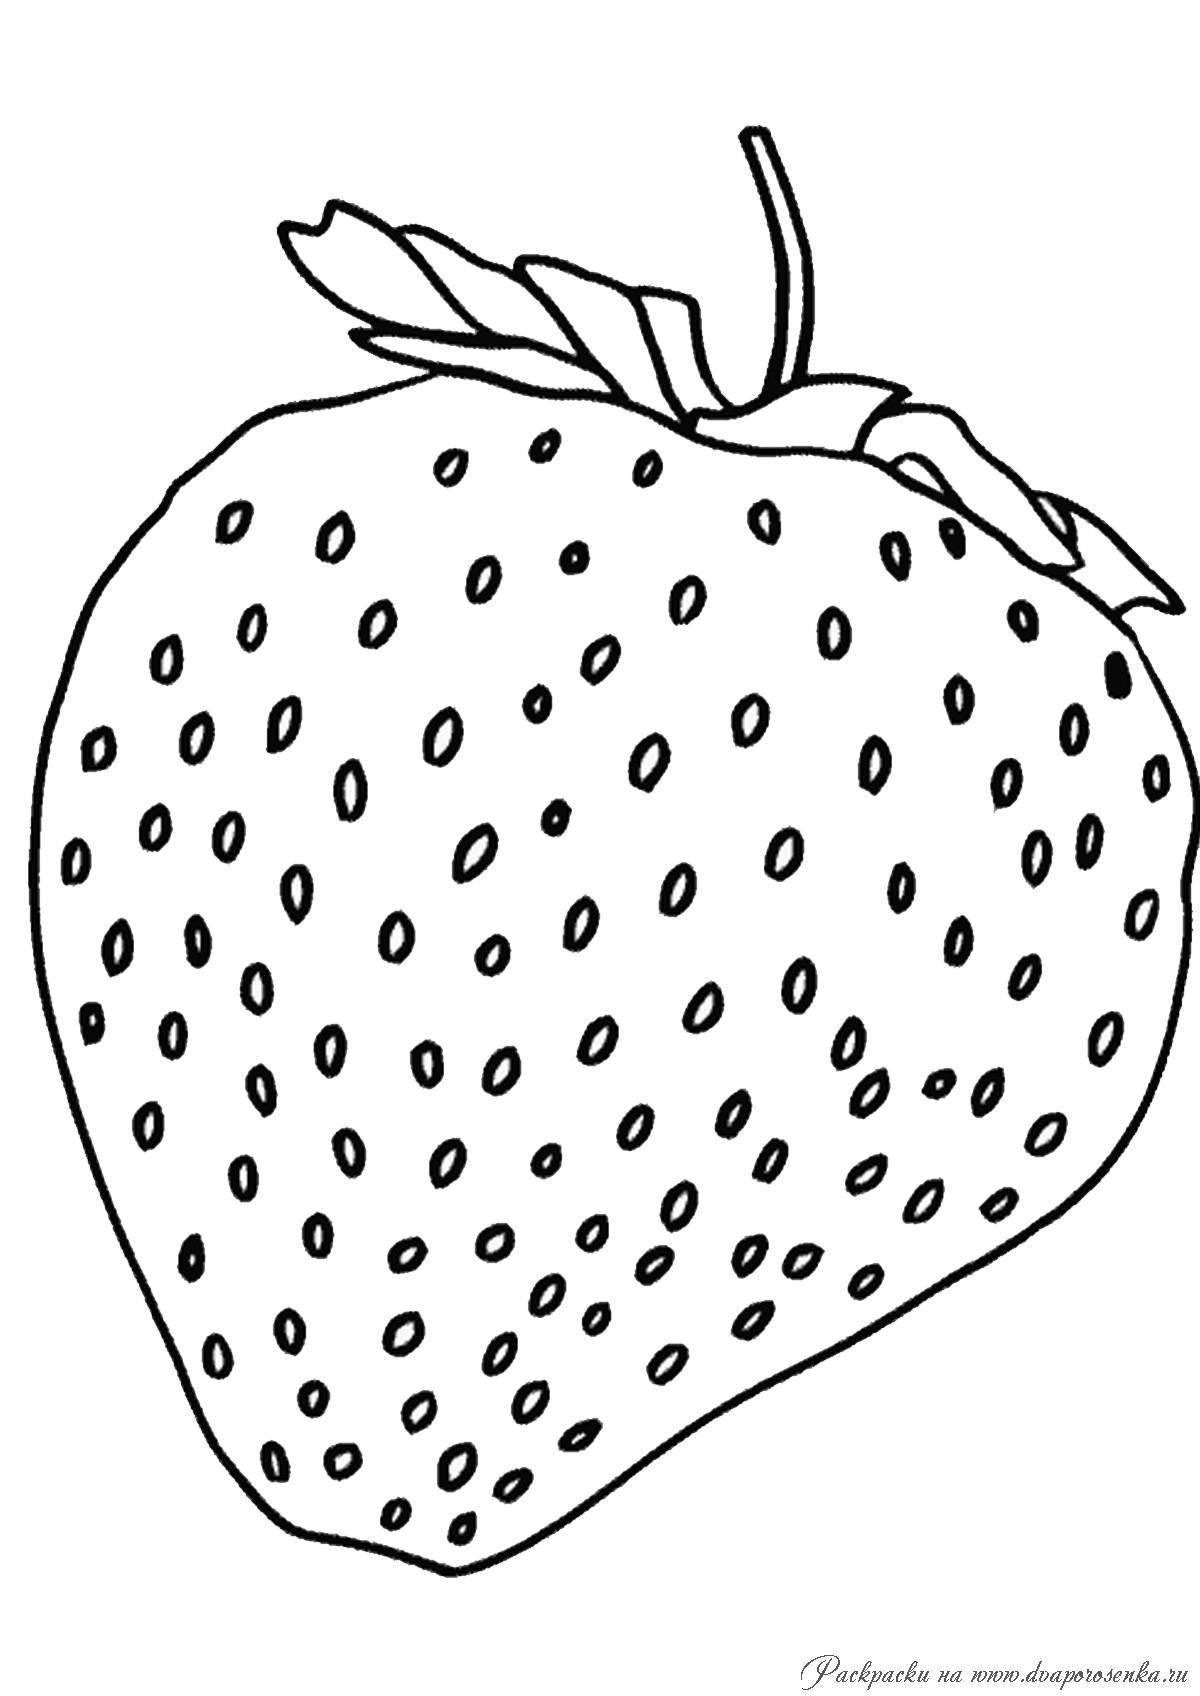 Fun fruit coloring pages for kids